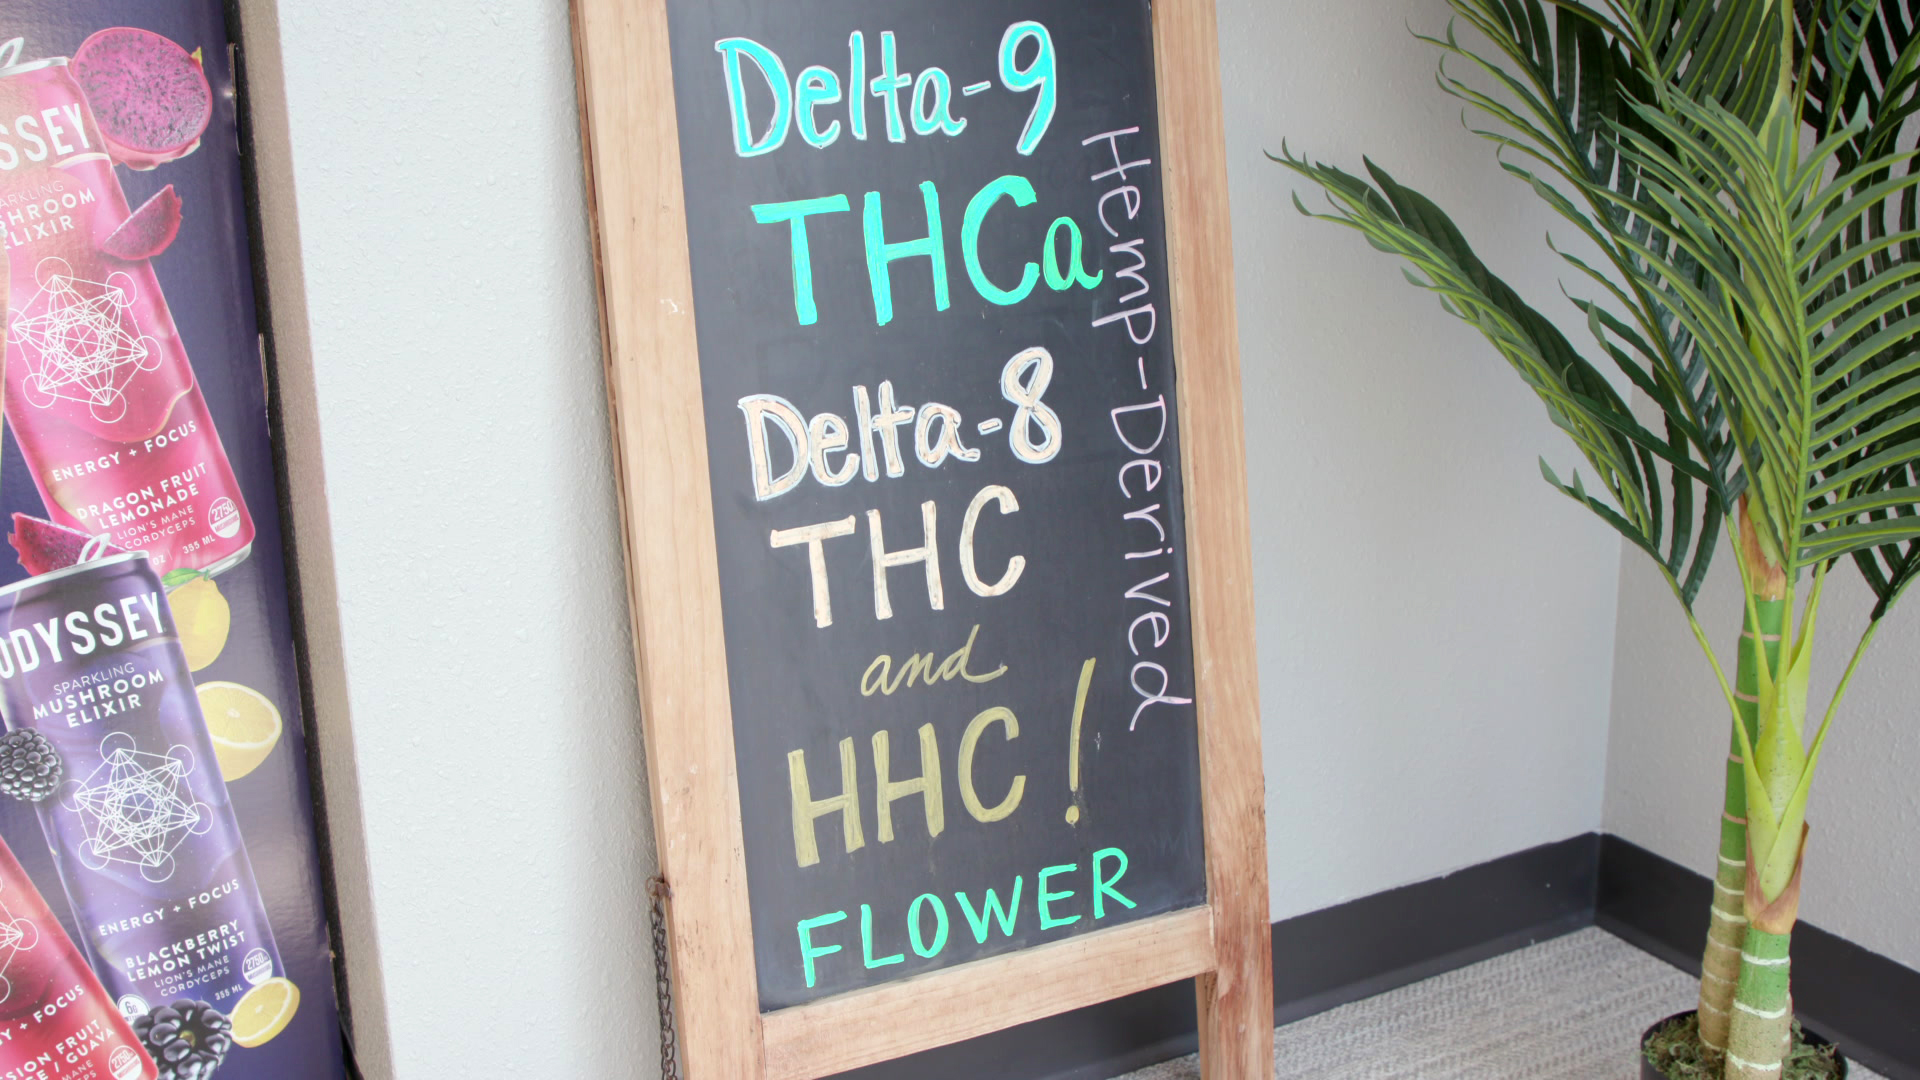 The words "Hemp-Derived," "Delta-9 THCa," "Delta-8 THC and HHC!" and "Flower" are written in chalk on a slate sandwich board sign, in a room with a potted plant on one side and a printed advertisement for a beverage on the other side.